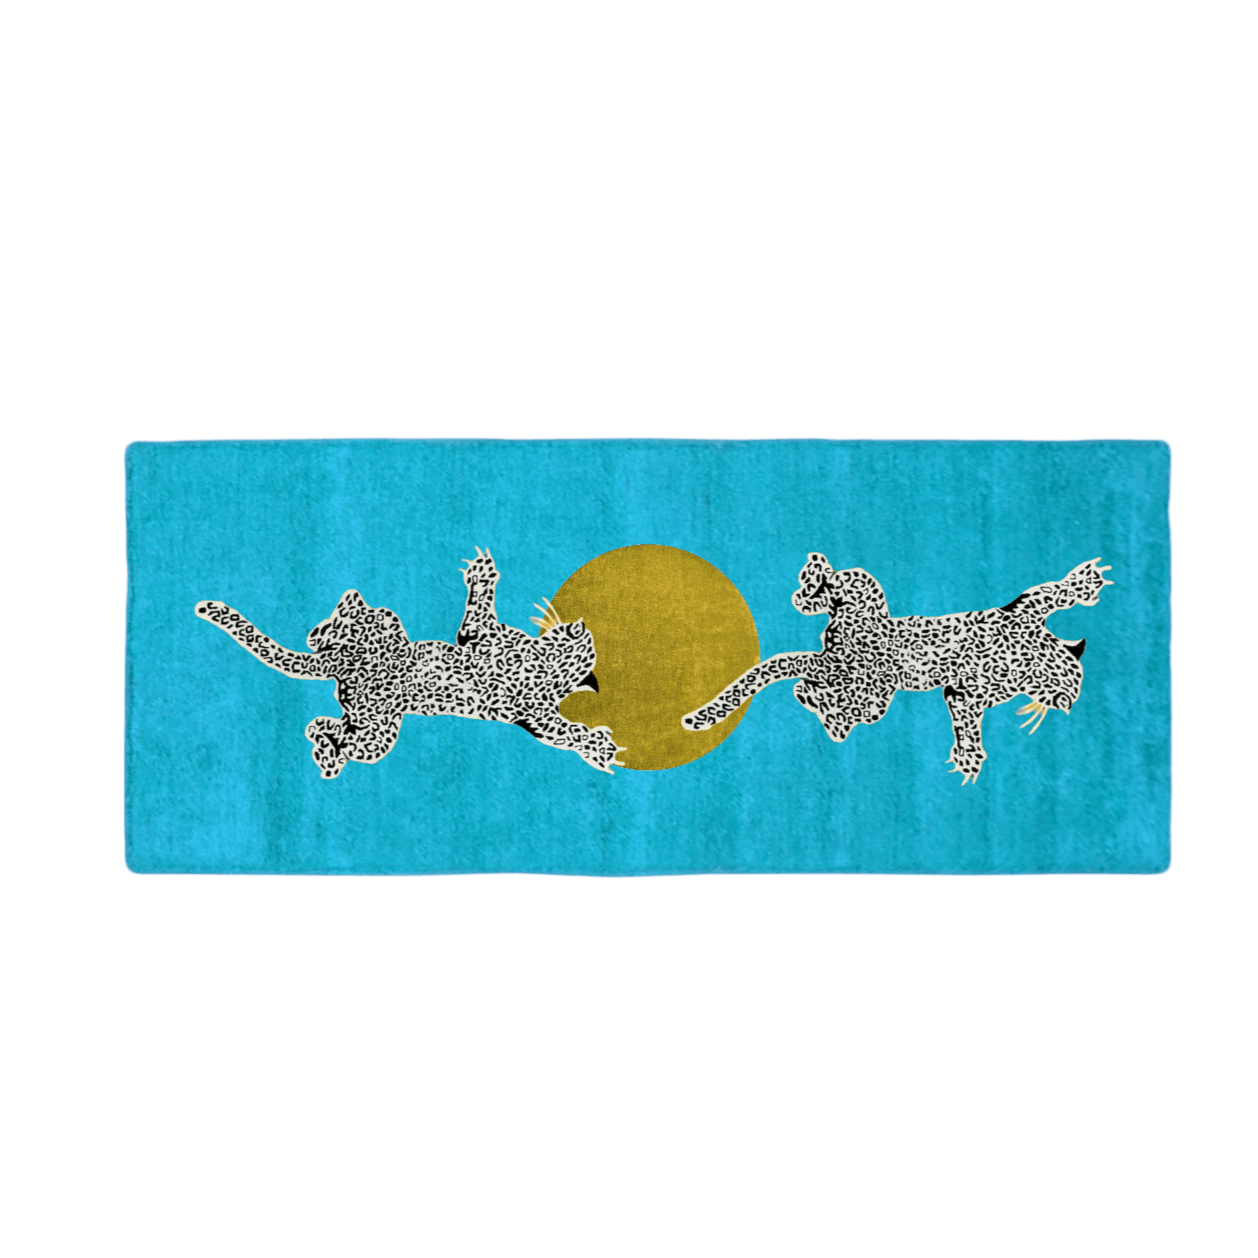 Leopards on Silky Road Hand Tufted Wool Rug Runner - Blue - MAIA HOMES